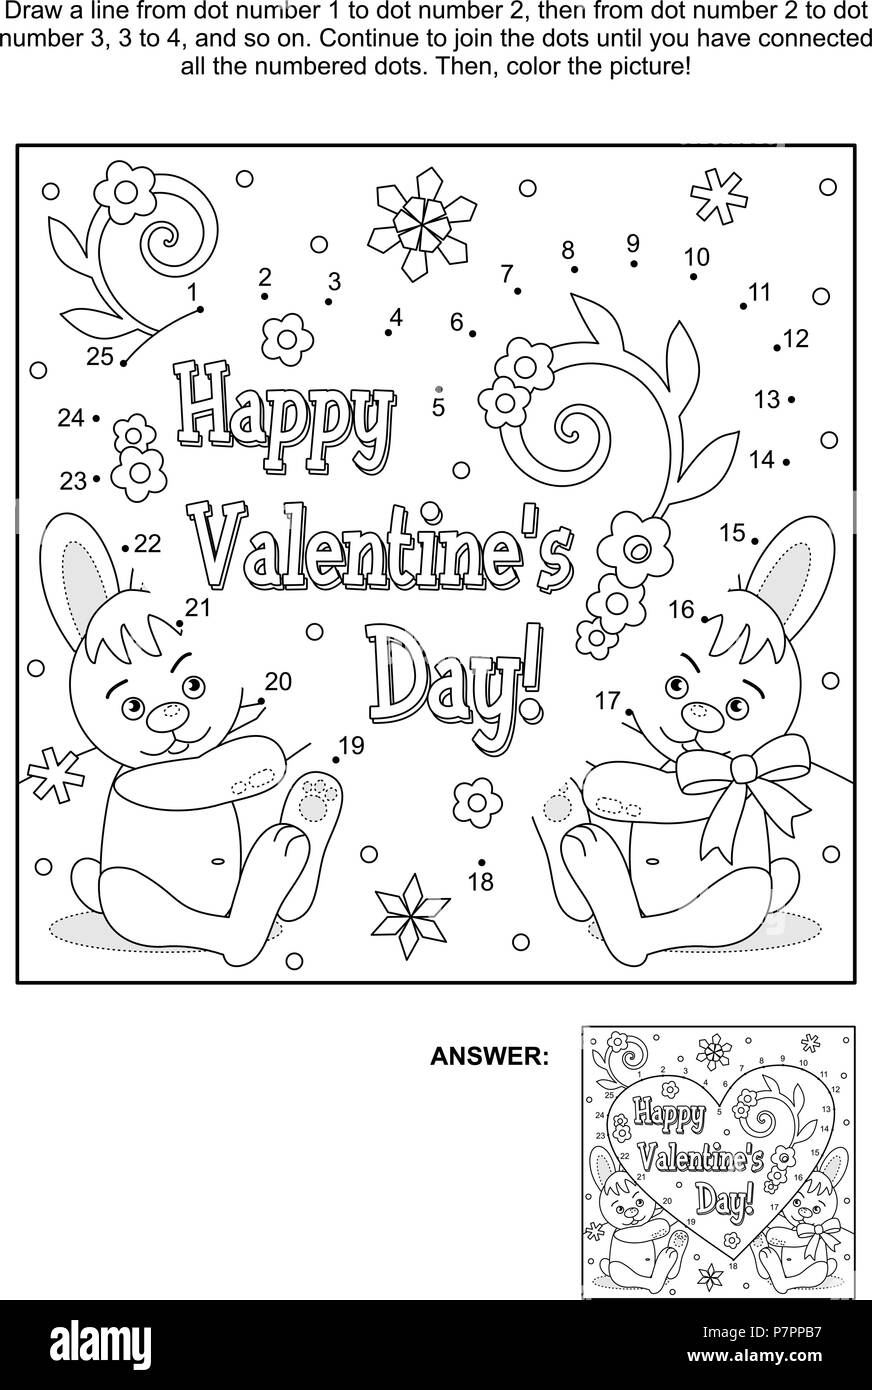 Valentine's Day themed connect the dots picture puzzle and coloring page with hidden heart, greeting text, two cute bunnies, flowers and snowlakes. Stock Vector